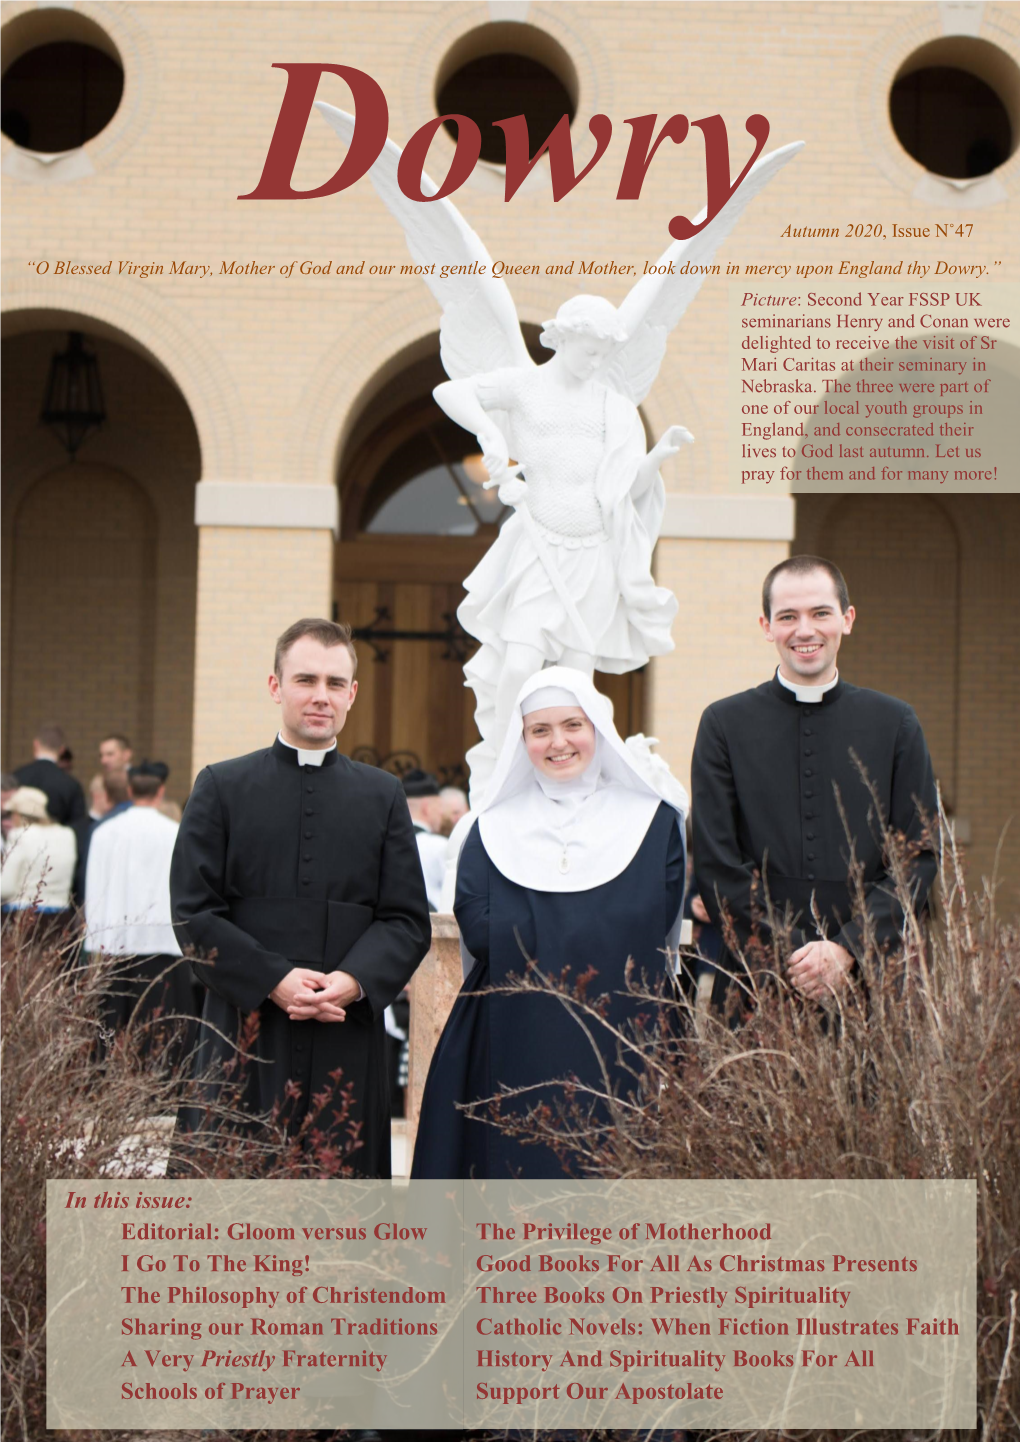 Dowry.” Picture: Second Year FSSP UK Seminarians Henry and Conan Were Delighted to Receive the Visit of Sr Mari Caritas at Their Seminary in Nebraska